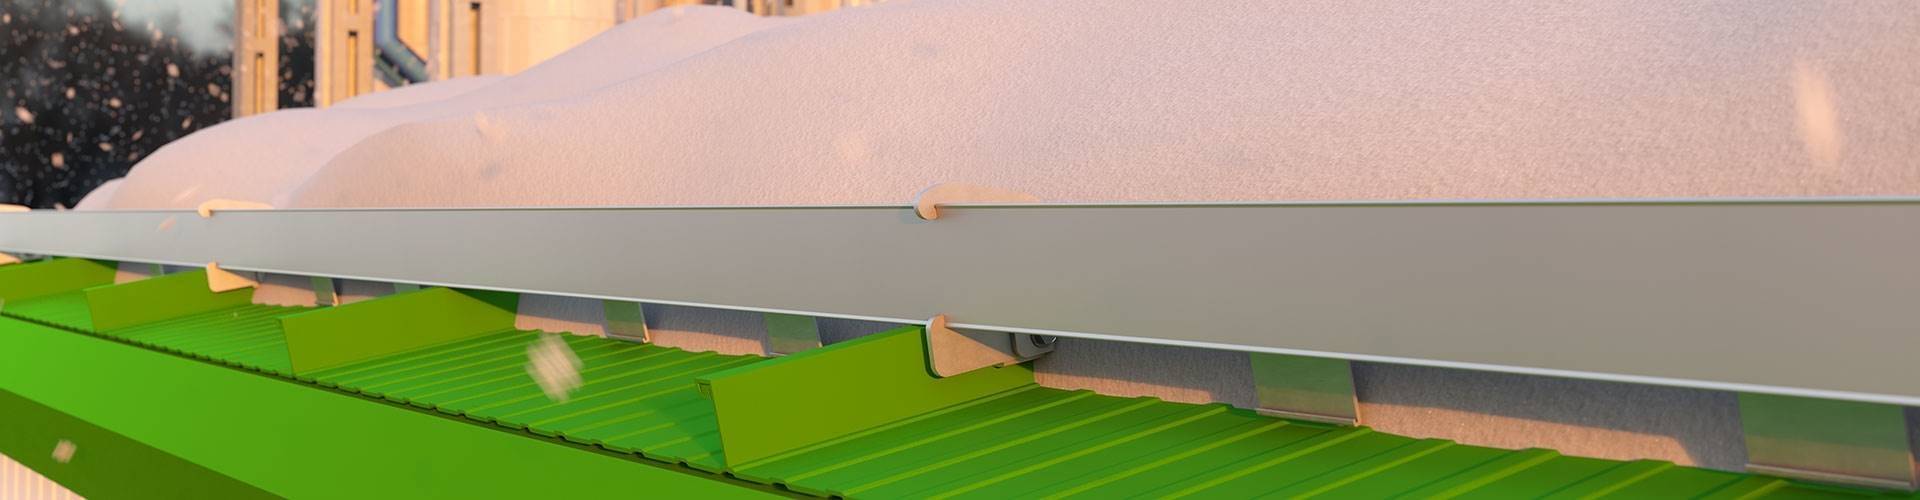 SNOW TITAN® - Commercial Duty Snow Rails for insulated metal roofs with up to 42